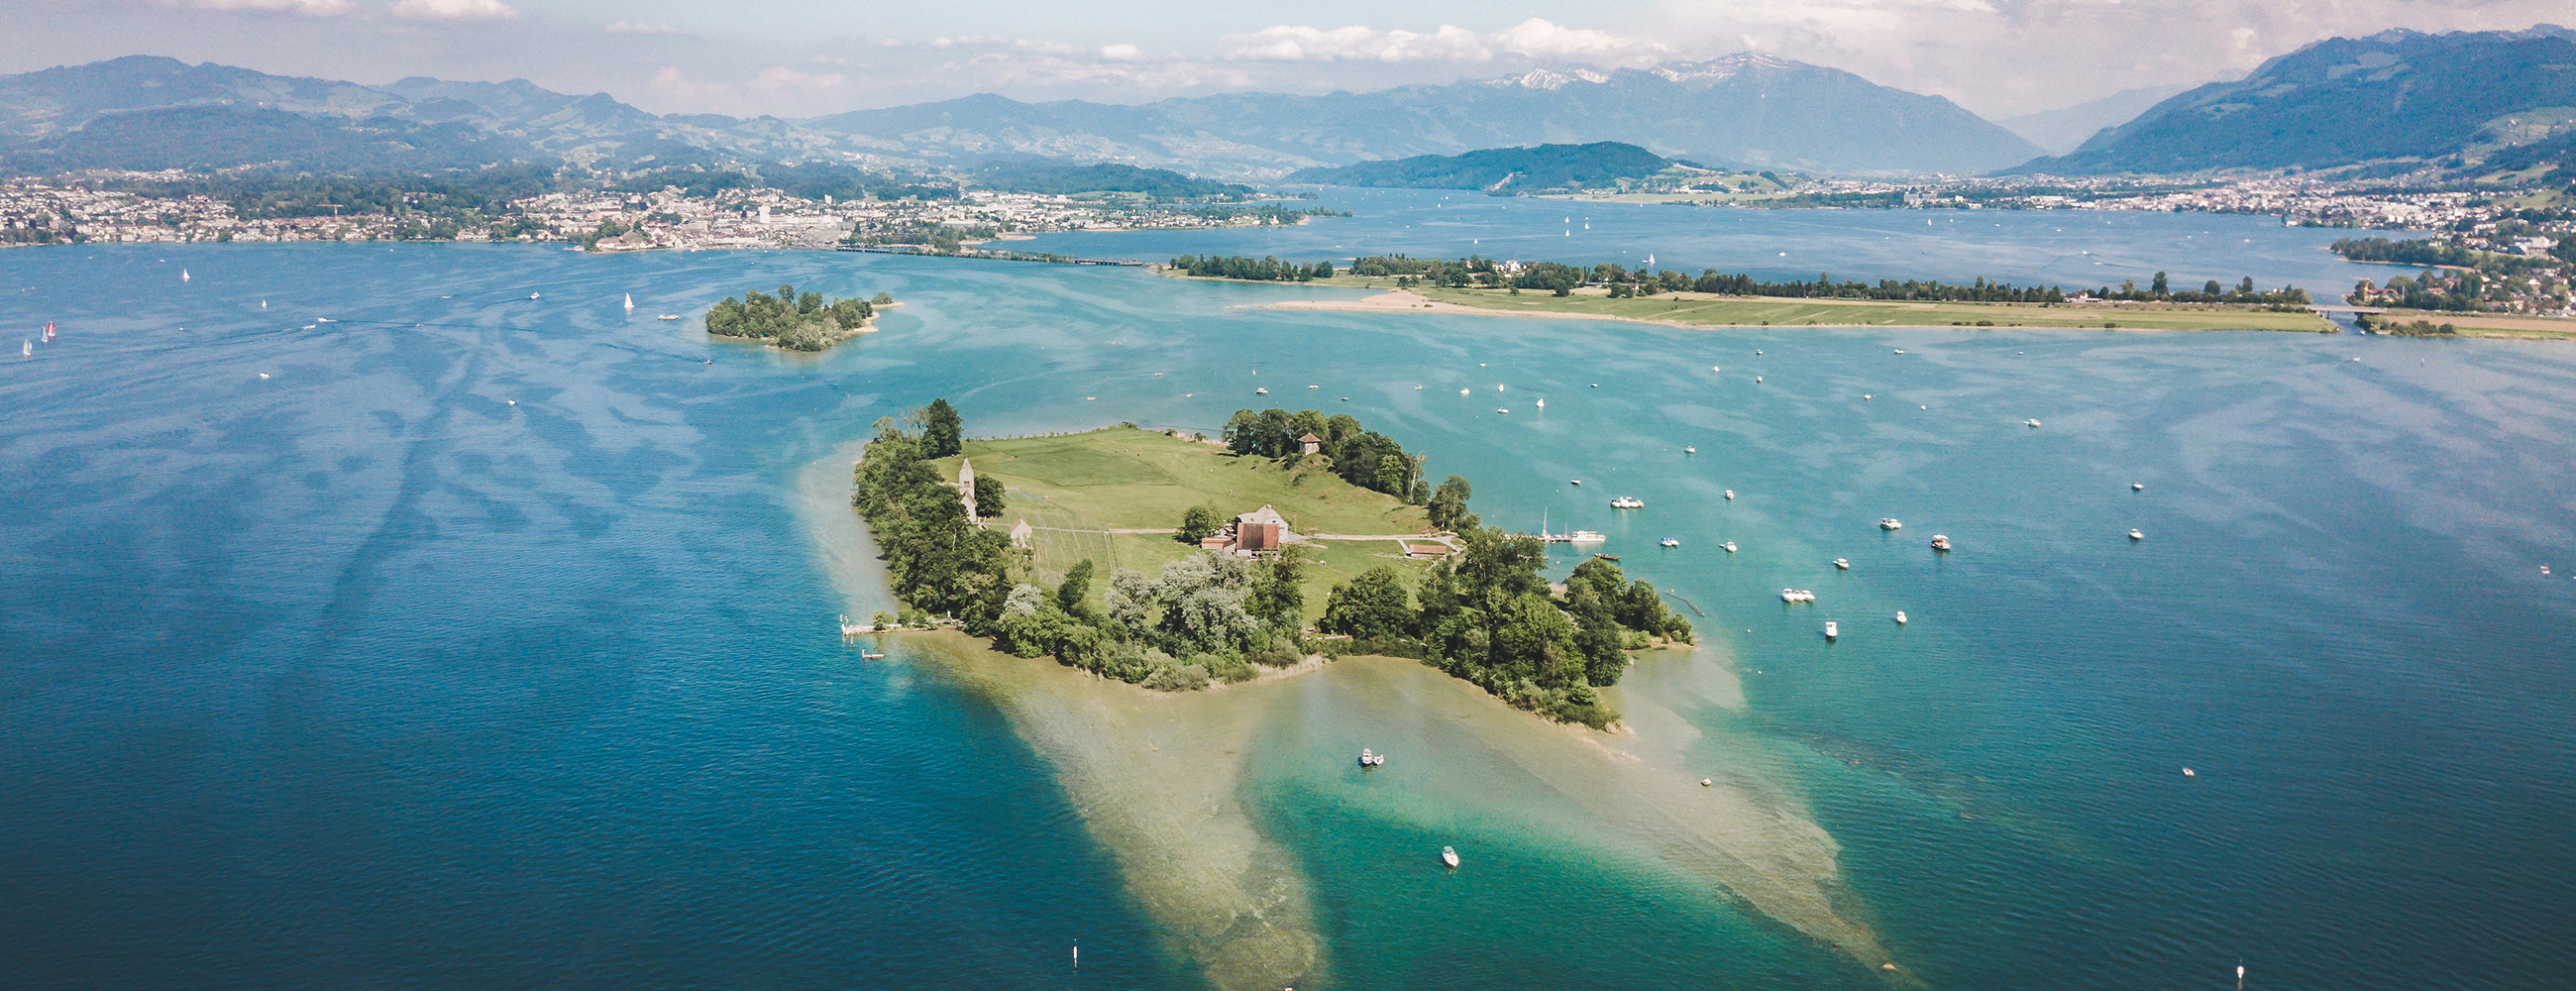 events-hensa-rapperswil-altendorf-02